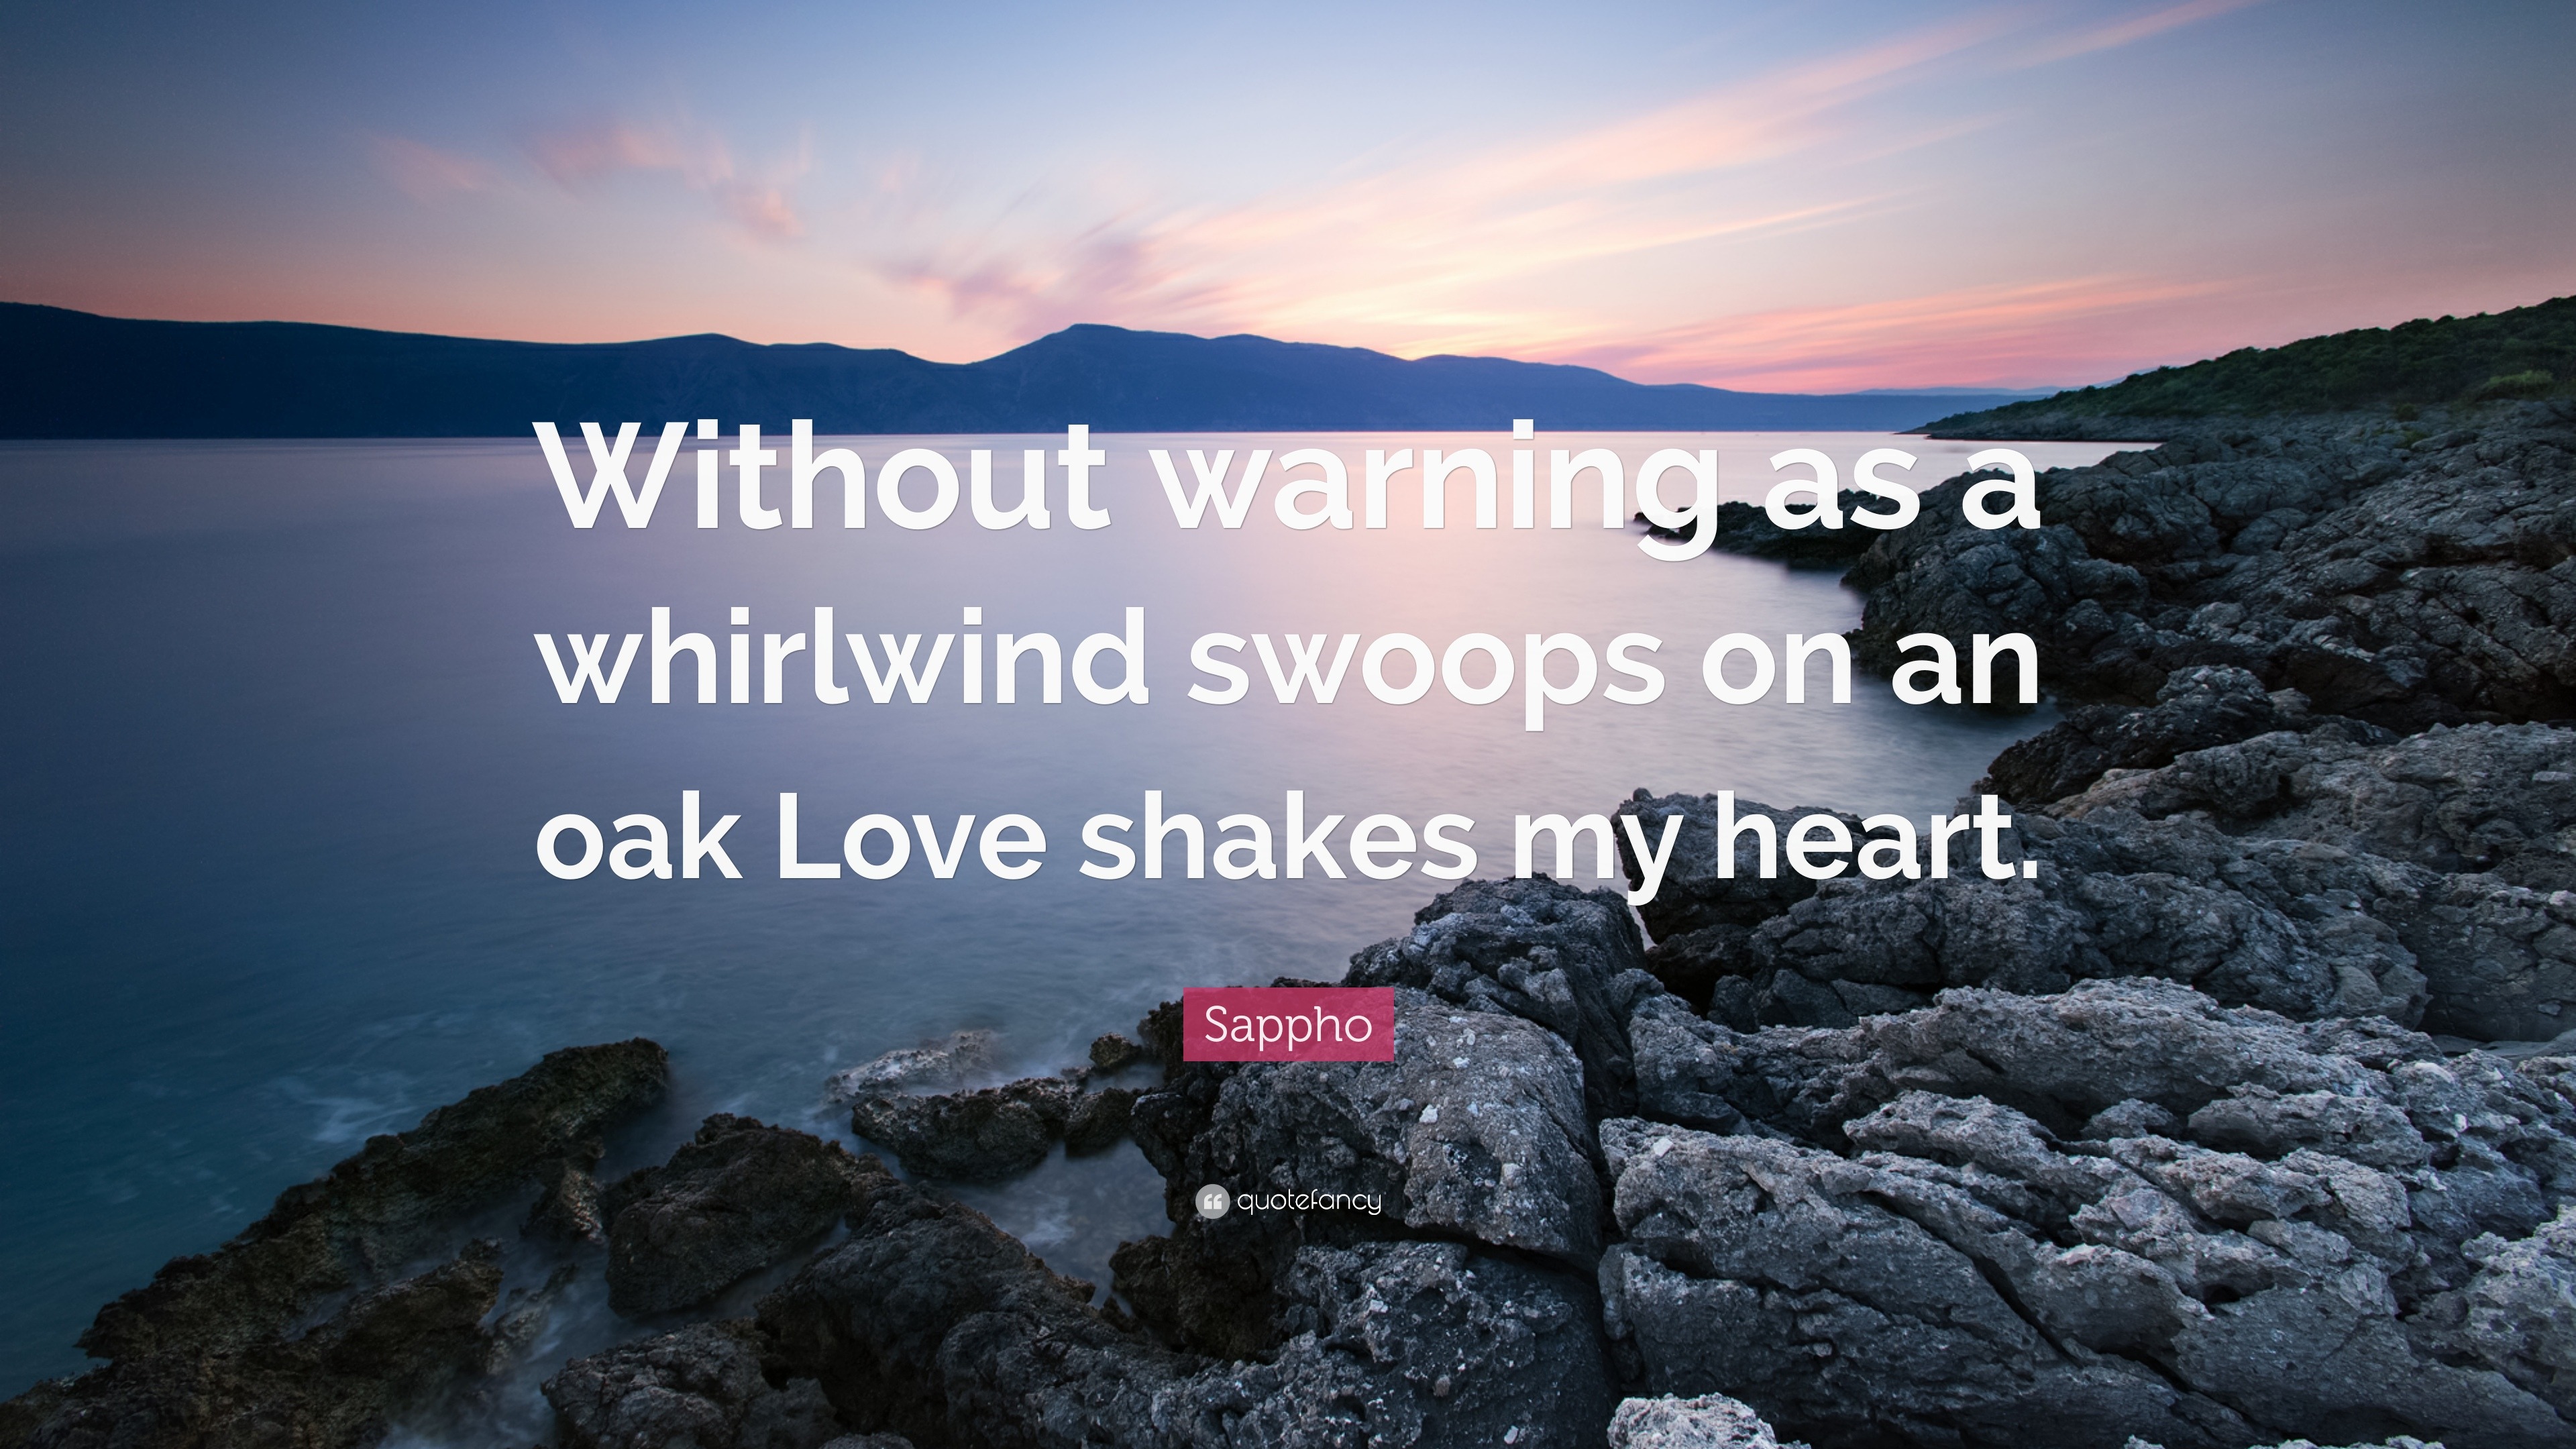 Sappho Quote Without Warning As A Whirlwind Swoops On An Oak Love Shakes My Heart